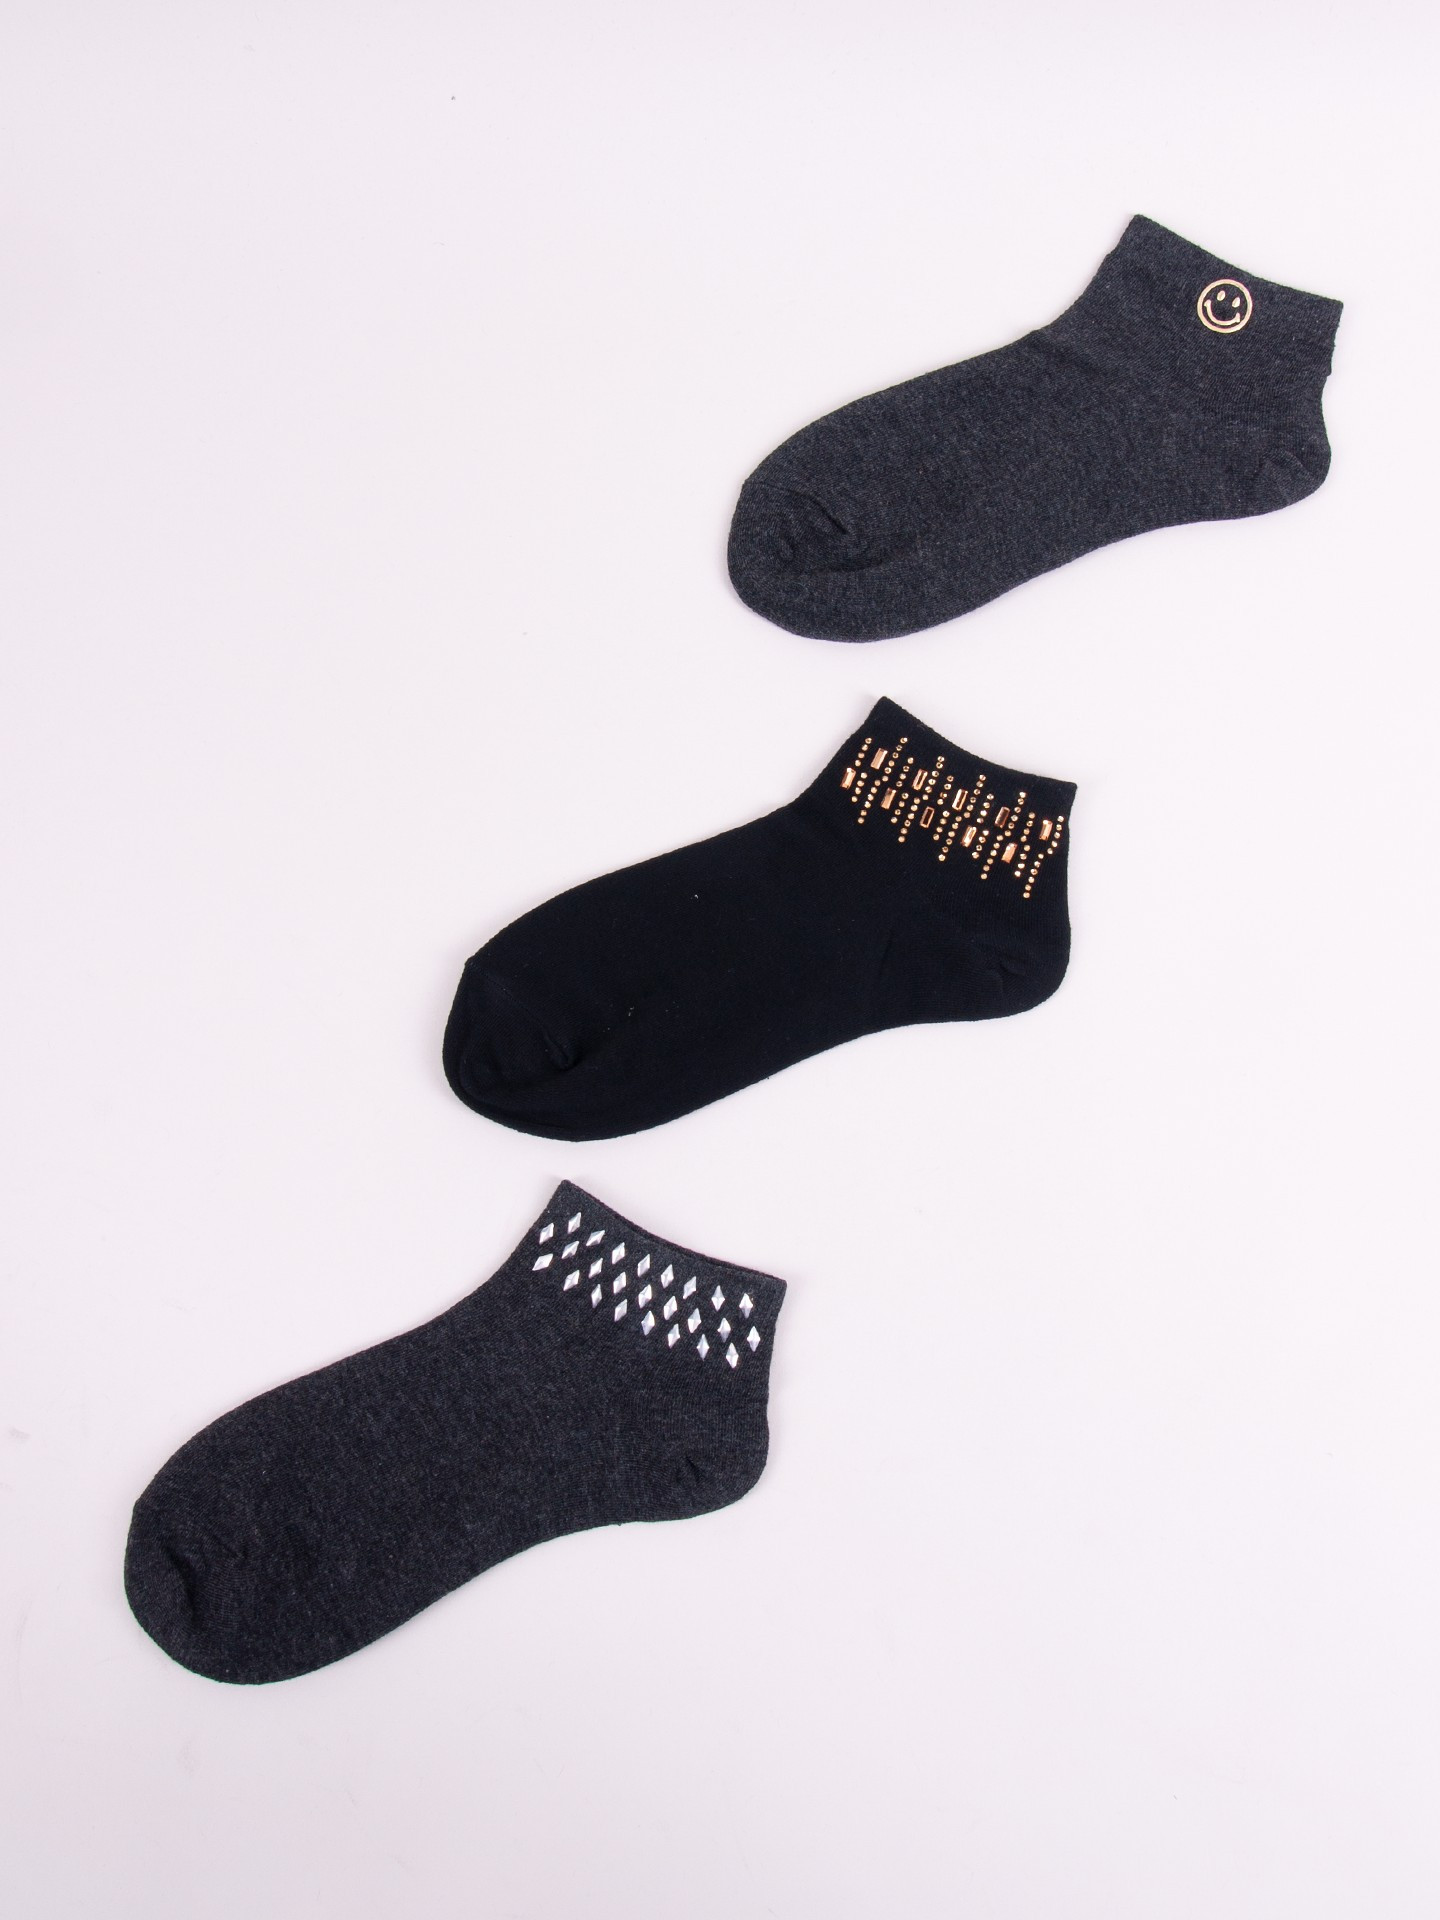 Levně Yoclub Woman's Women'S Socks With Crystals 3-Pack SKS-0001K-000B